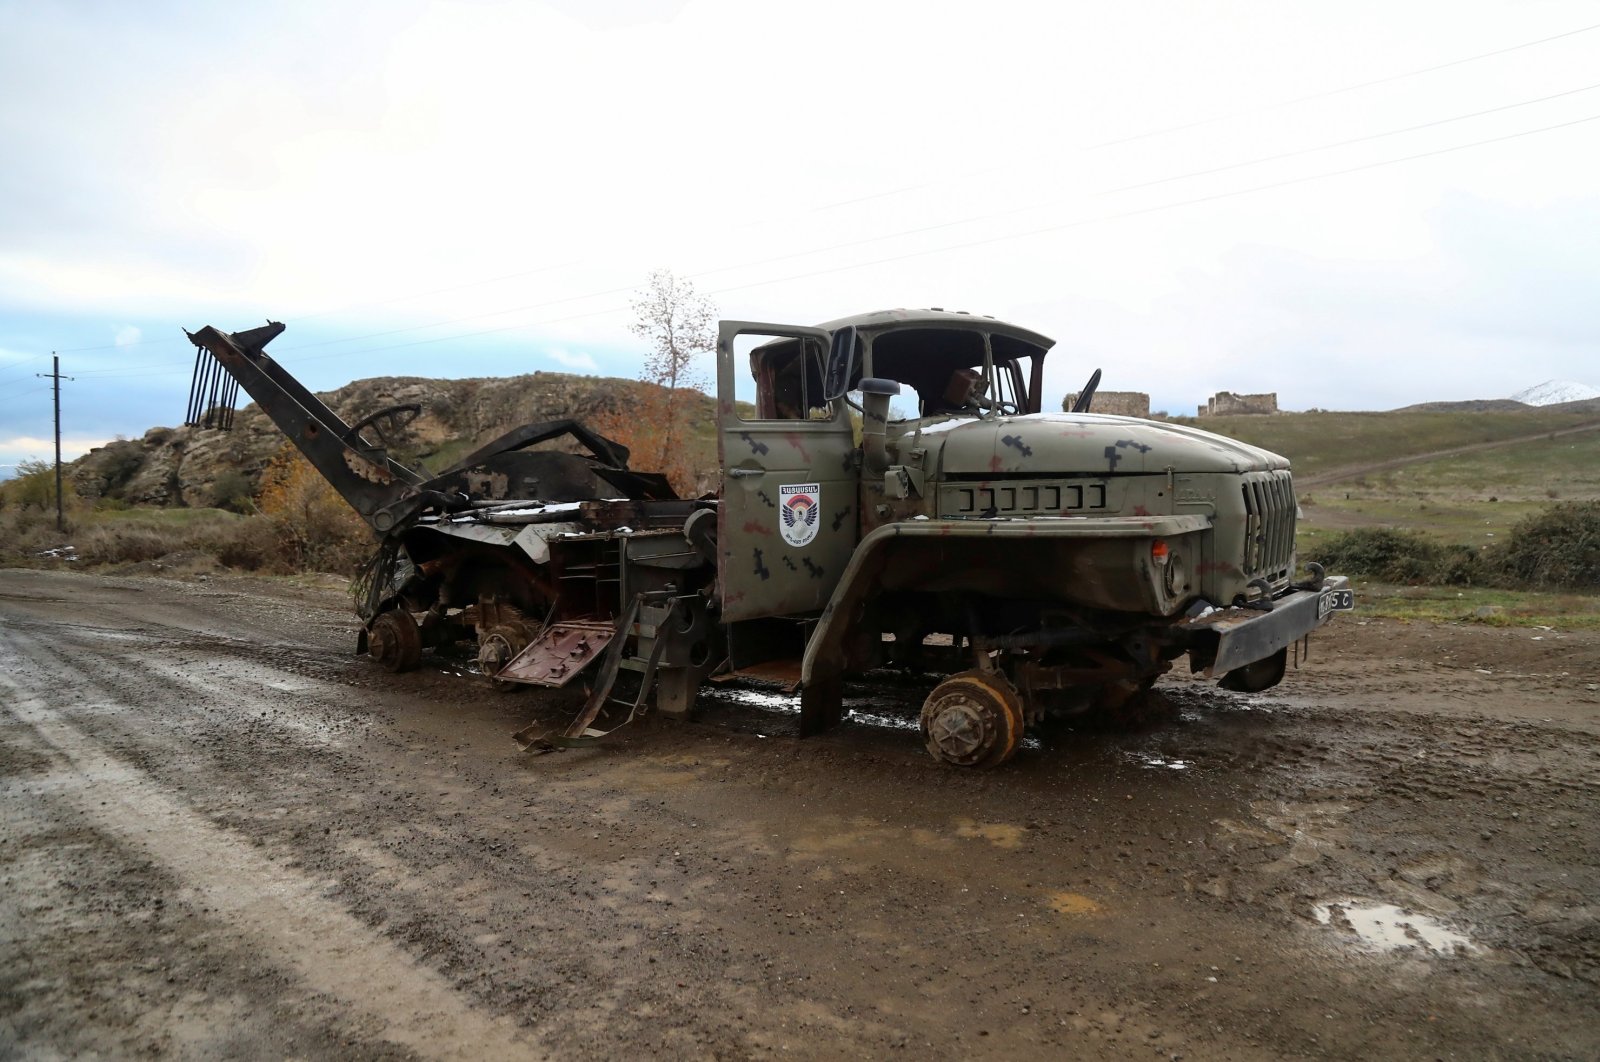 A damaged truck belonging to Armenian forces in an area that came under the control of Azerbaijan&#039;s troops following a military conflict over Nagorno-Karabakh, in Jabrayil District, Azerbaijan, December 7, 2020. (Reuters Photo)